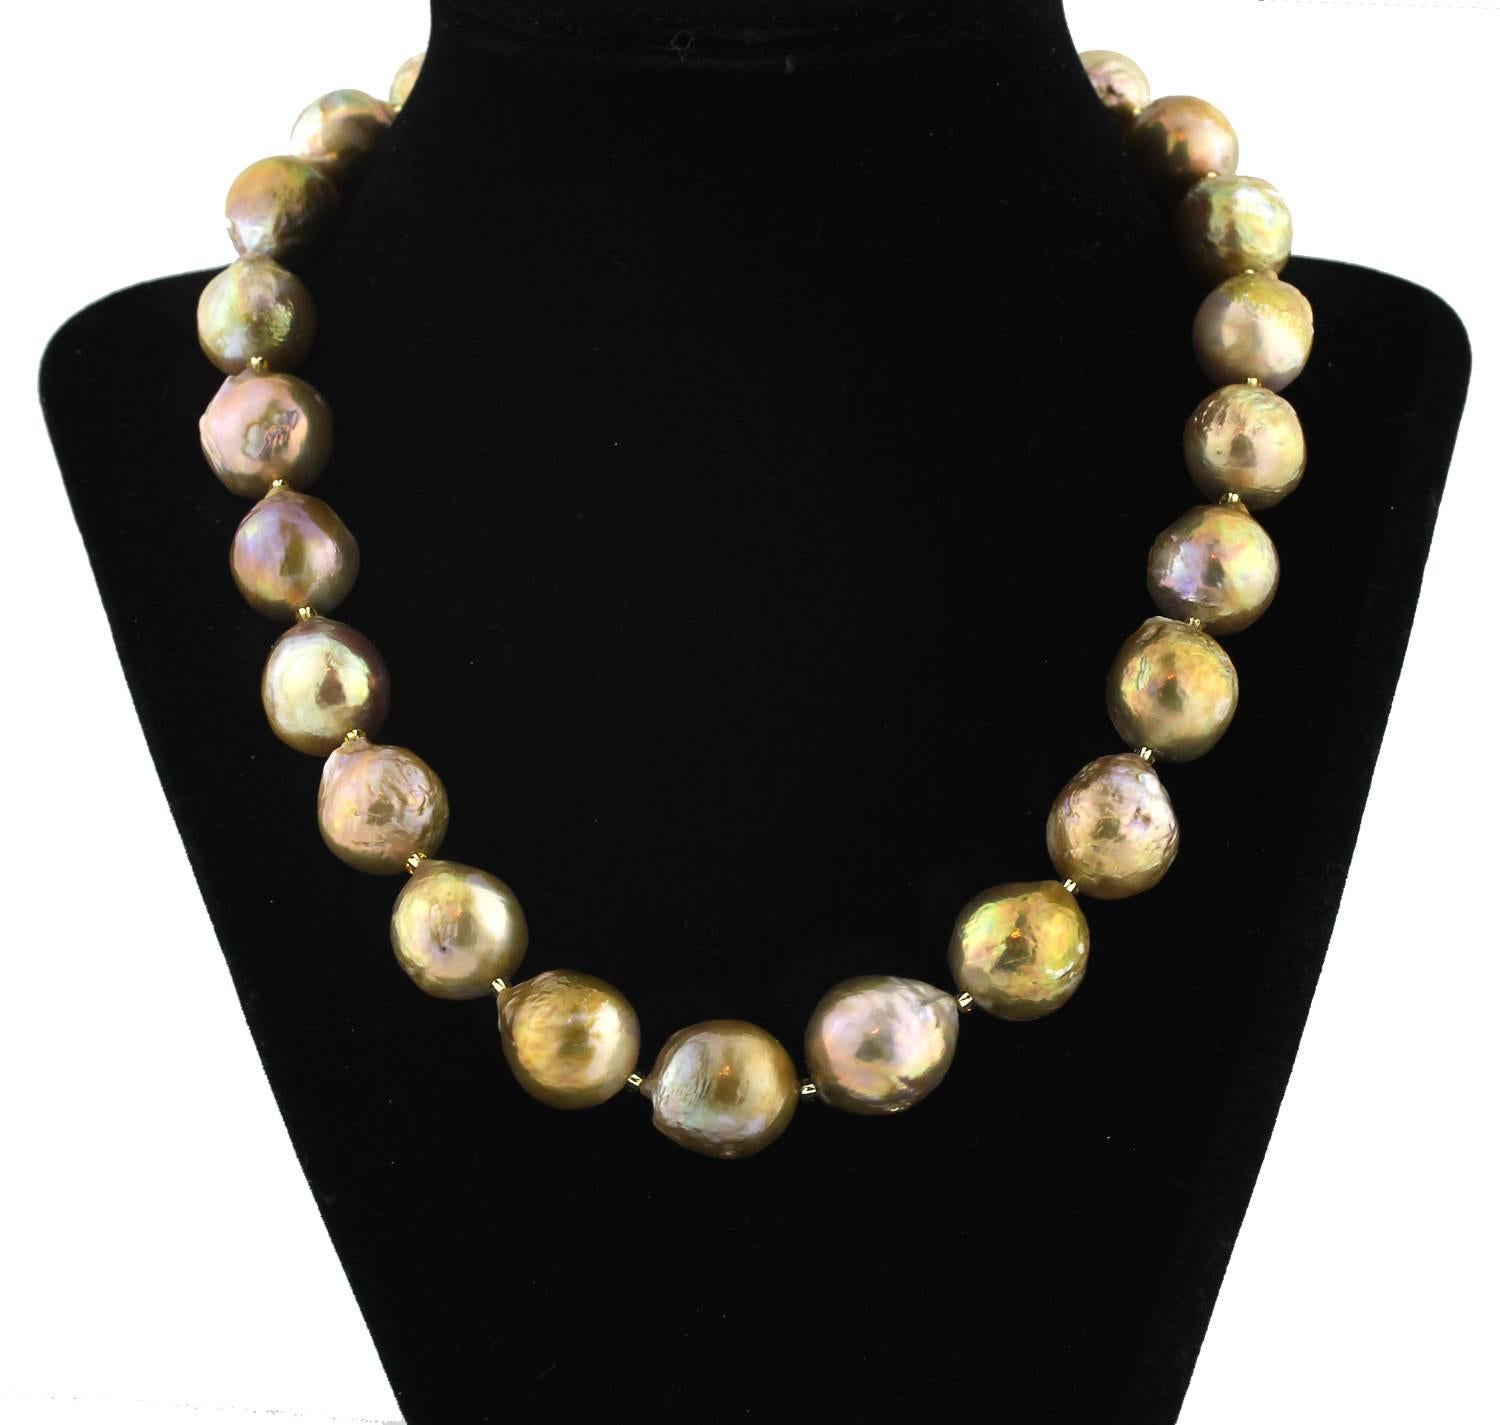 These are a spectacular combination of smooth and brilliant and wrinkled looking unique cultured Pearls with sparkling goldy crystal accents on this handmade necklace.  Size:  graduated up to 15.75 mm;  Length:  19 inches;  Clasp:  gold plated.  
